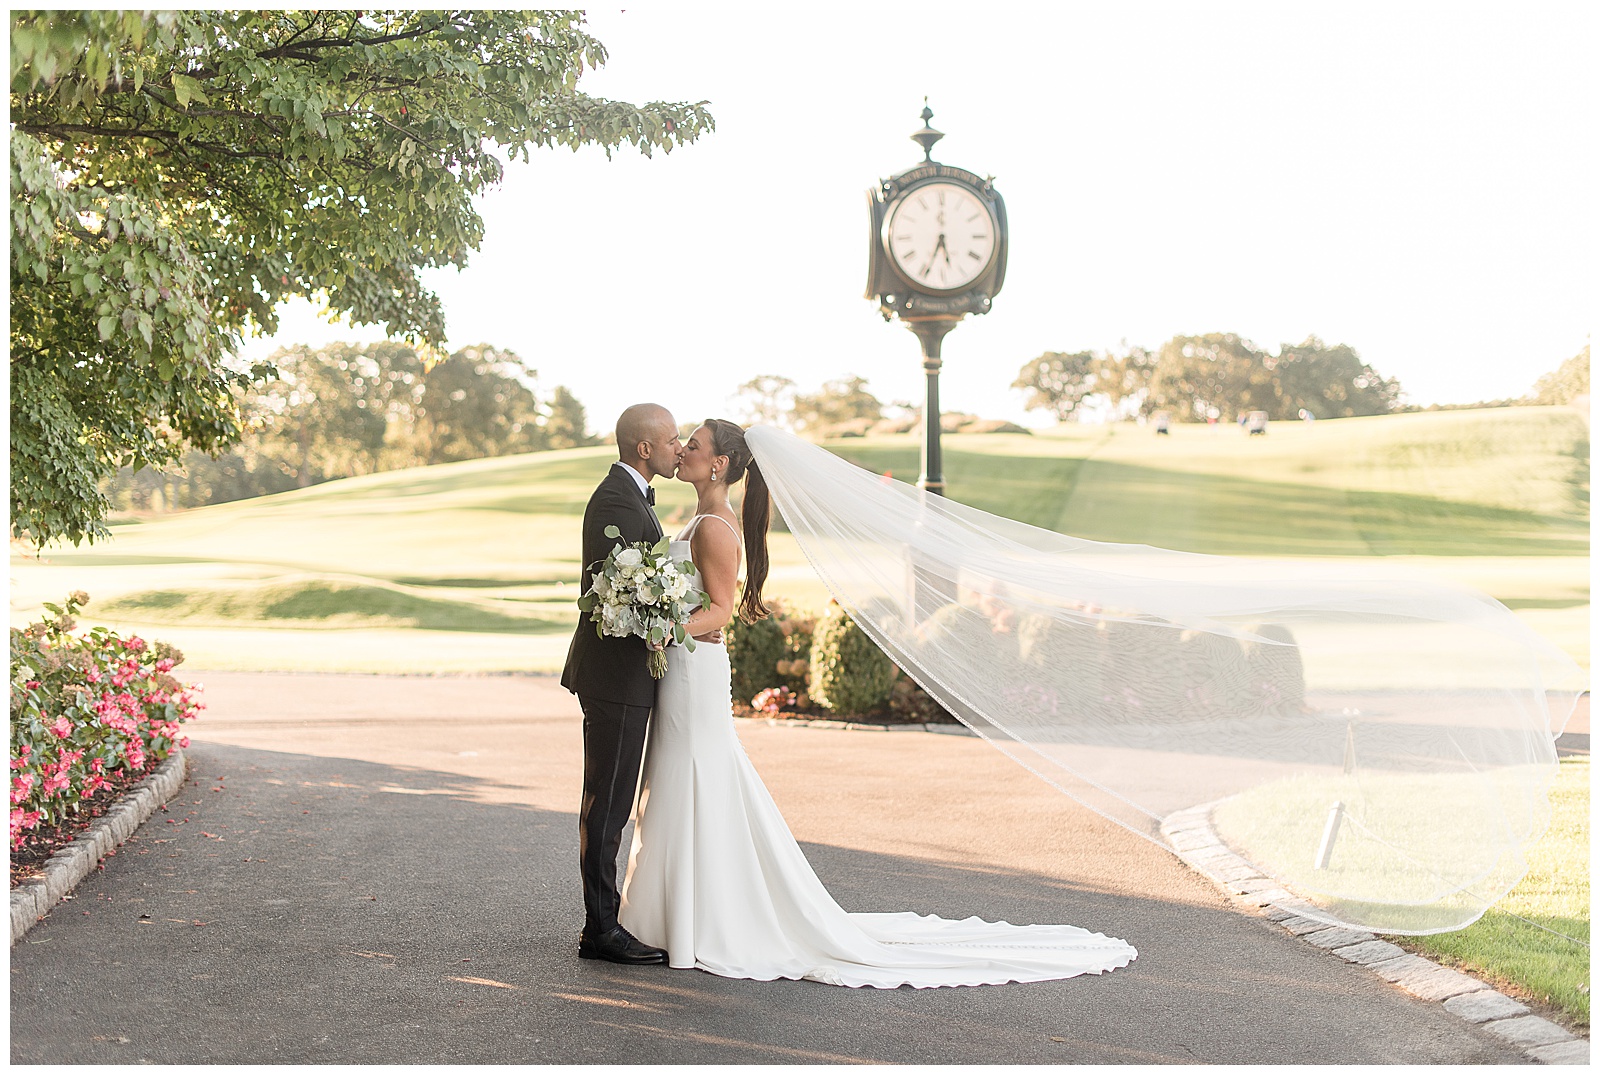 couple kissing with bridal veil blowing behind her and antique clock in background at north jersey country club